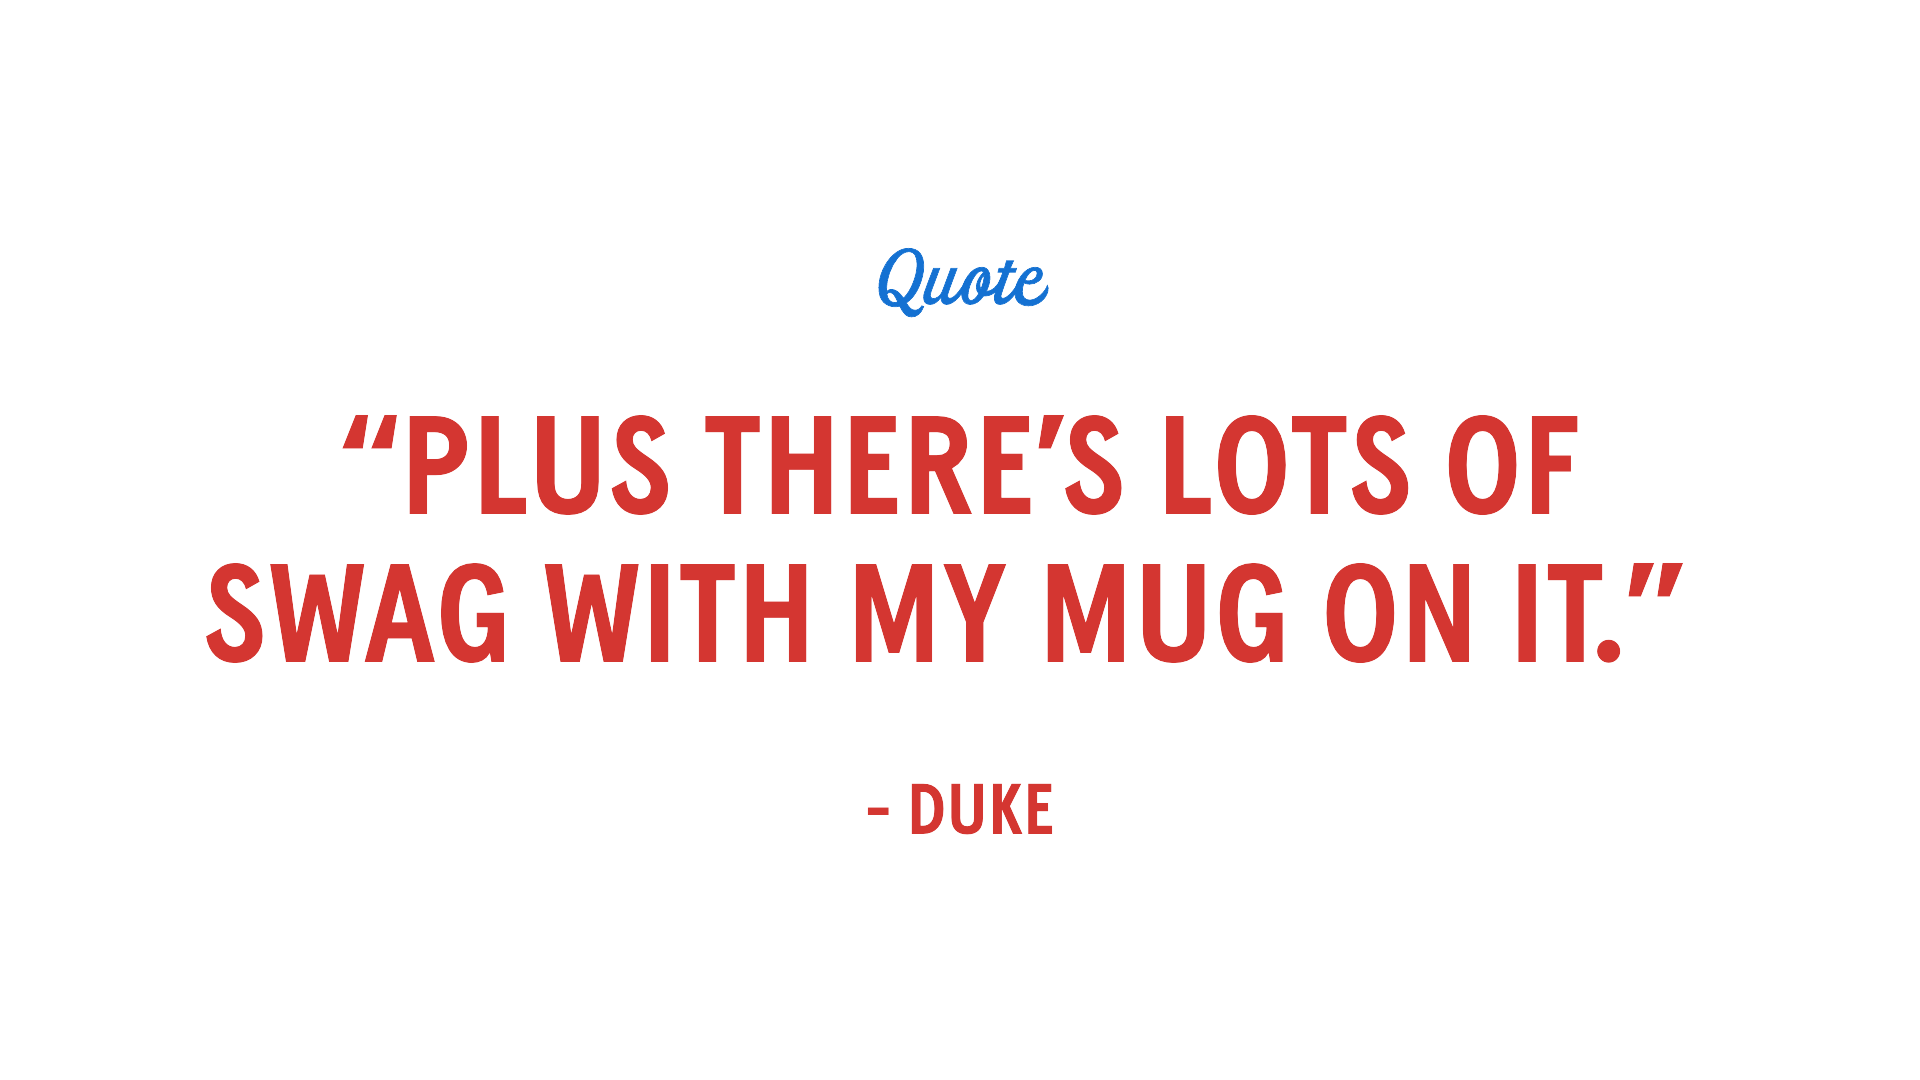 Quote - "Plus there's lots of swag with my mug on it" - Duke